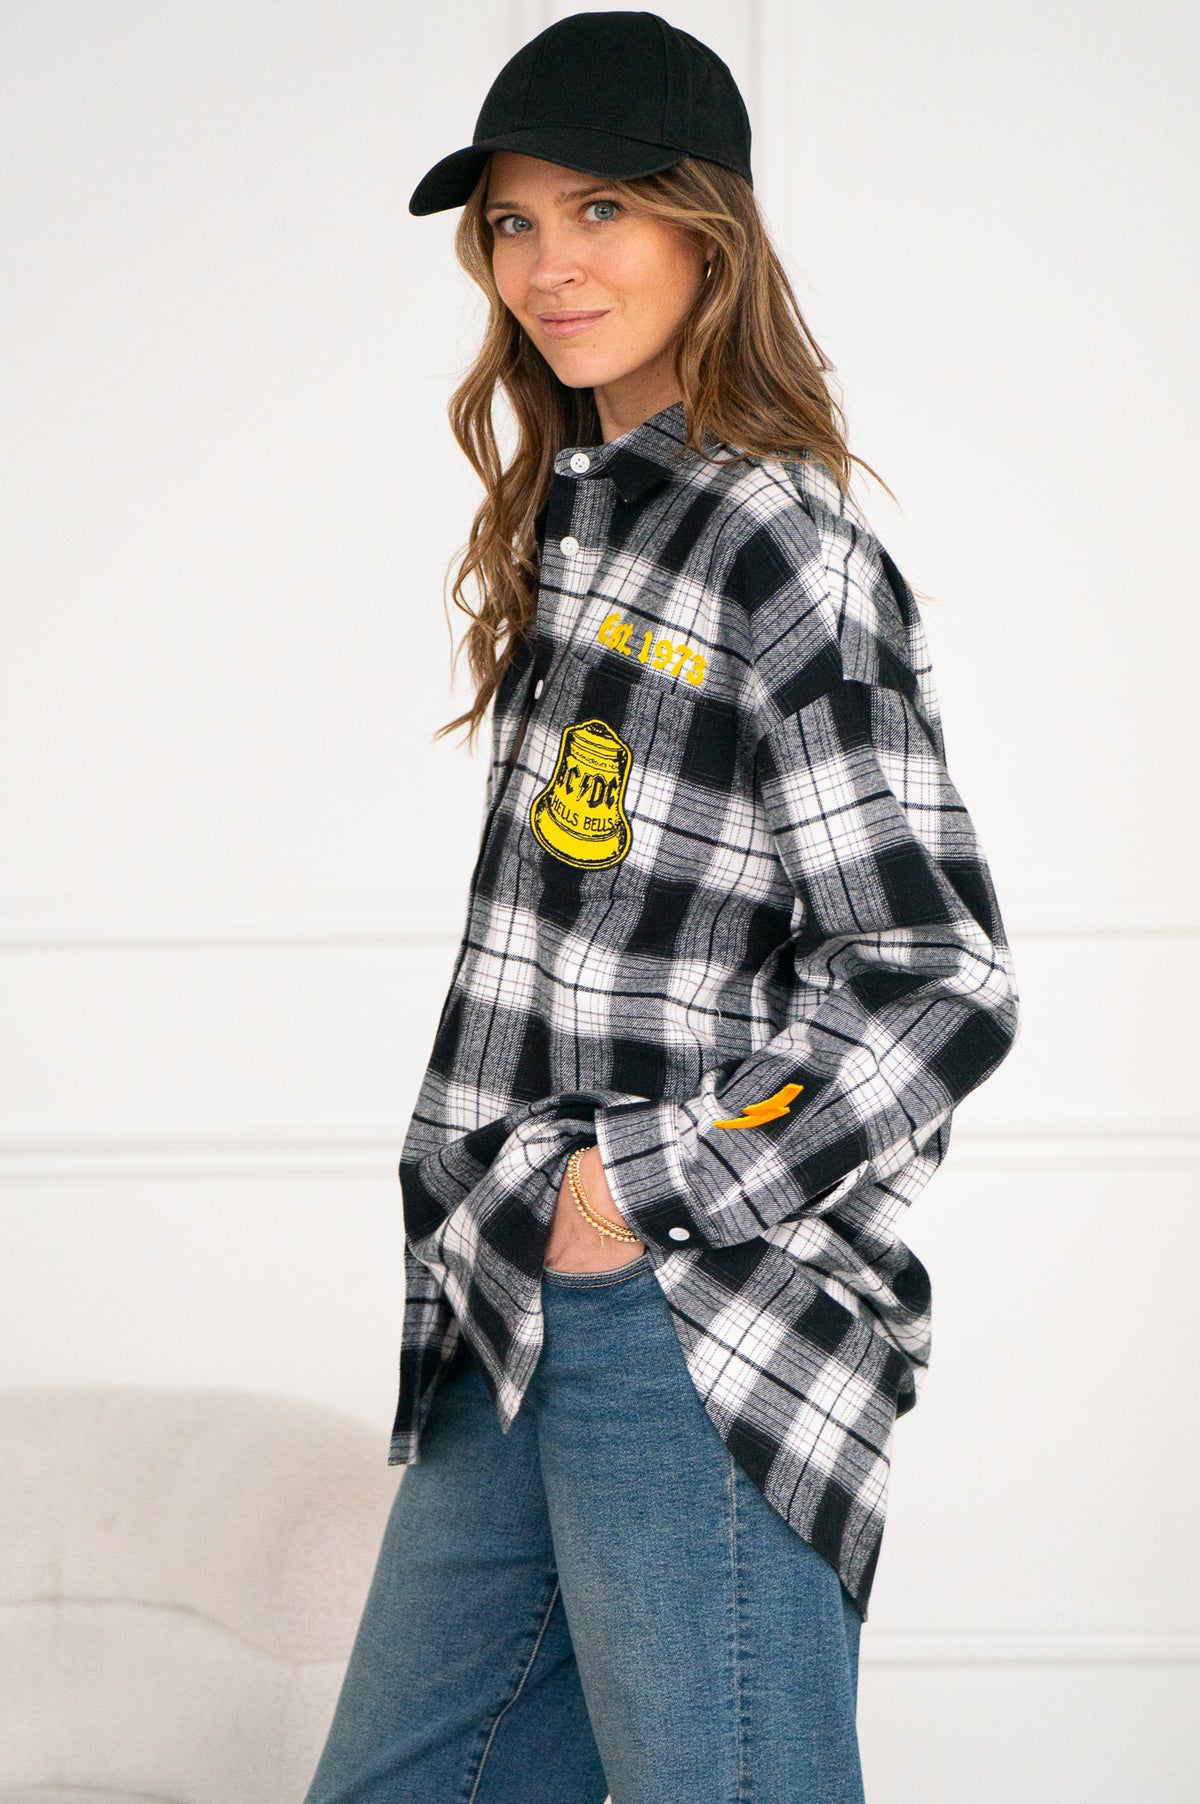 PLAID BUTTON DOWN TOP WITH PATCHES